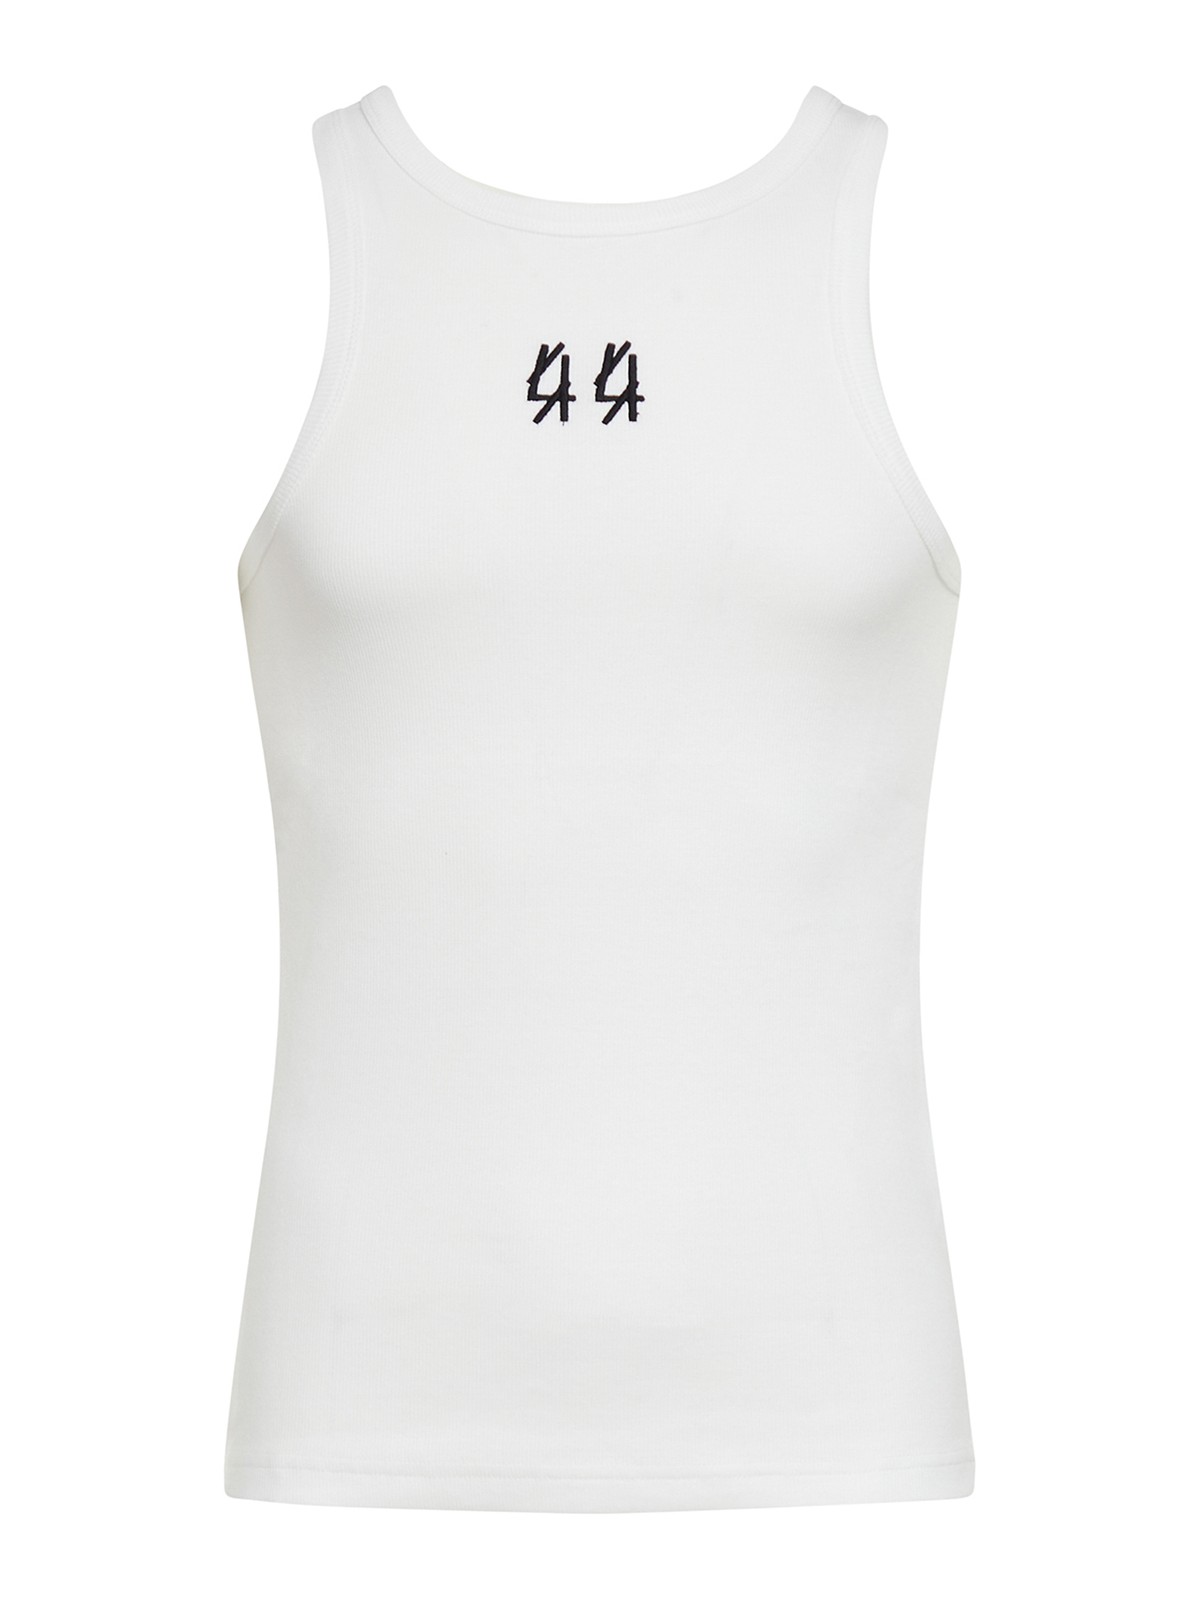 44 LABEL GROUP SPINE TANK TOP